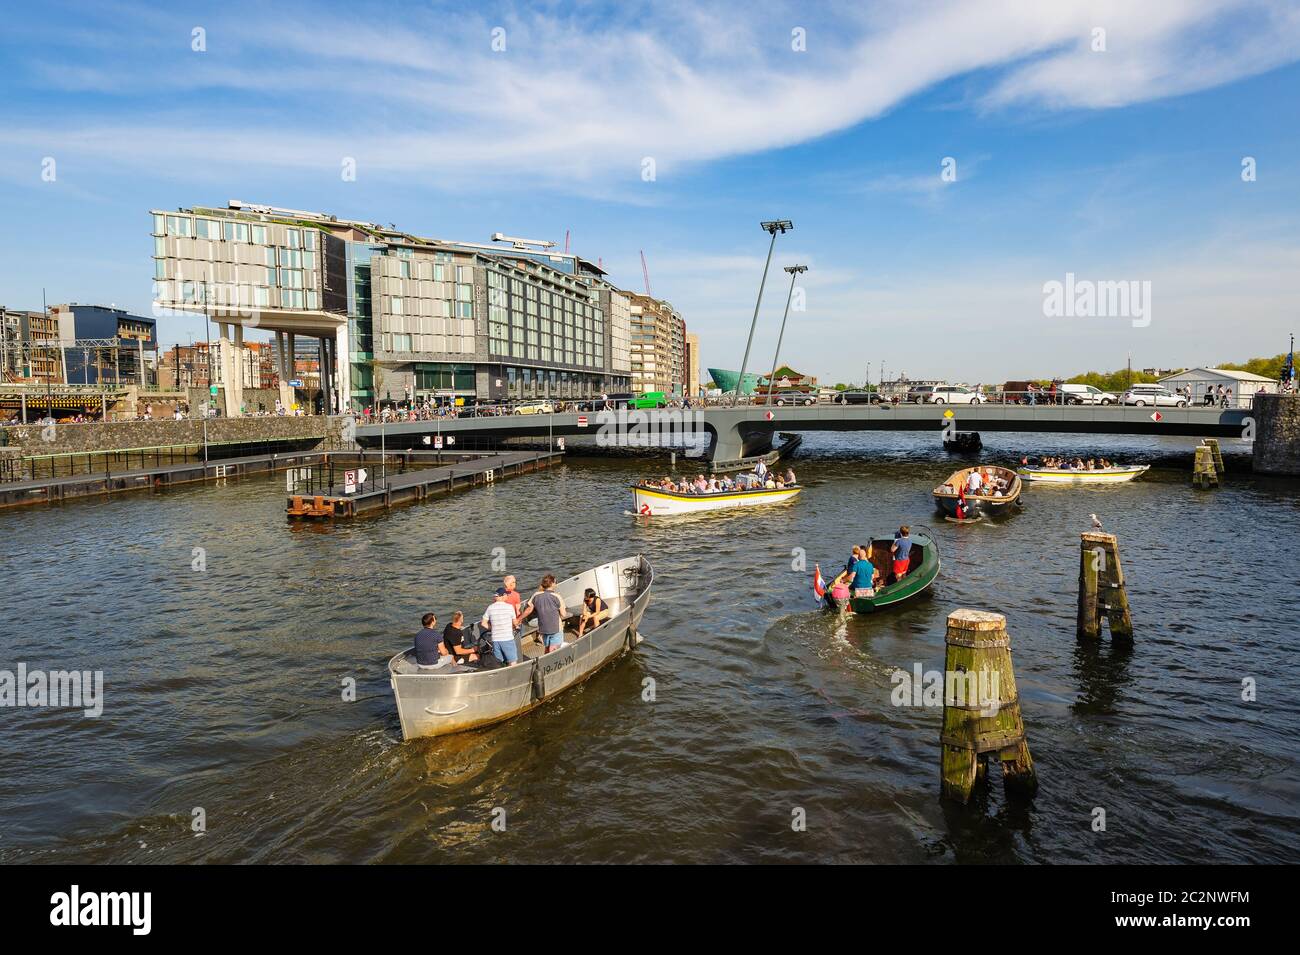 Sightseeng in front of DoubleTree Hilton hotel, around the Central Station of Amsterdam Stock Photo